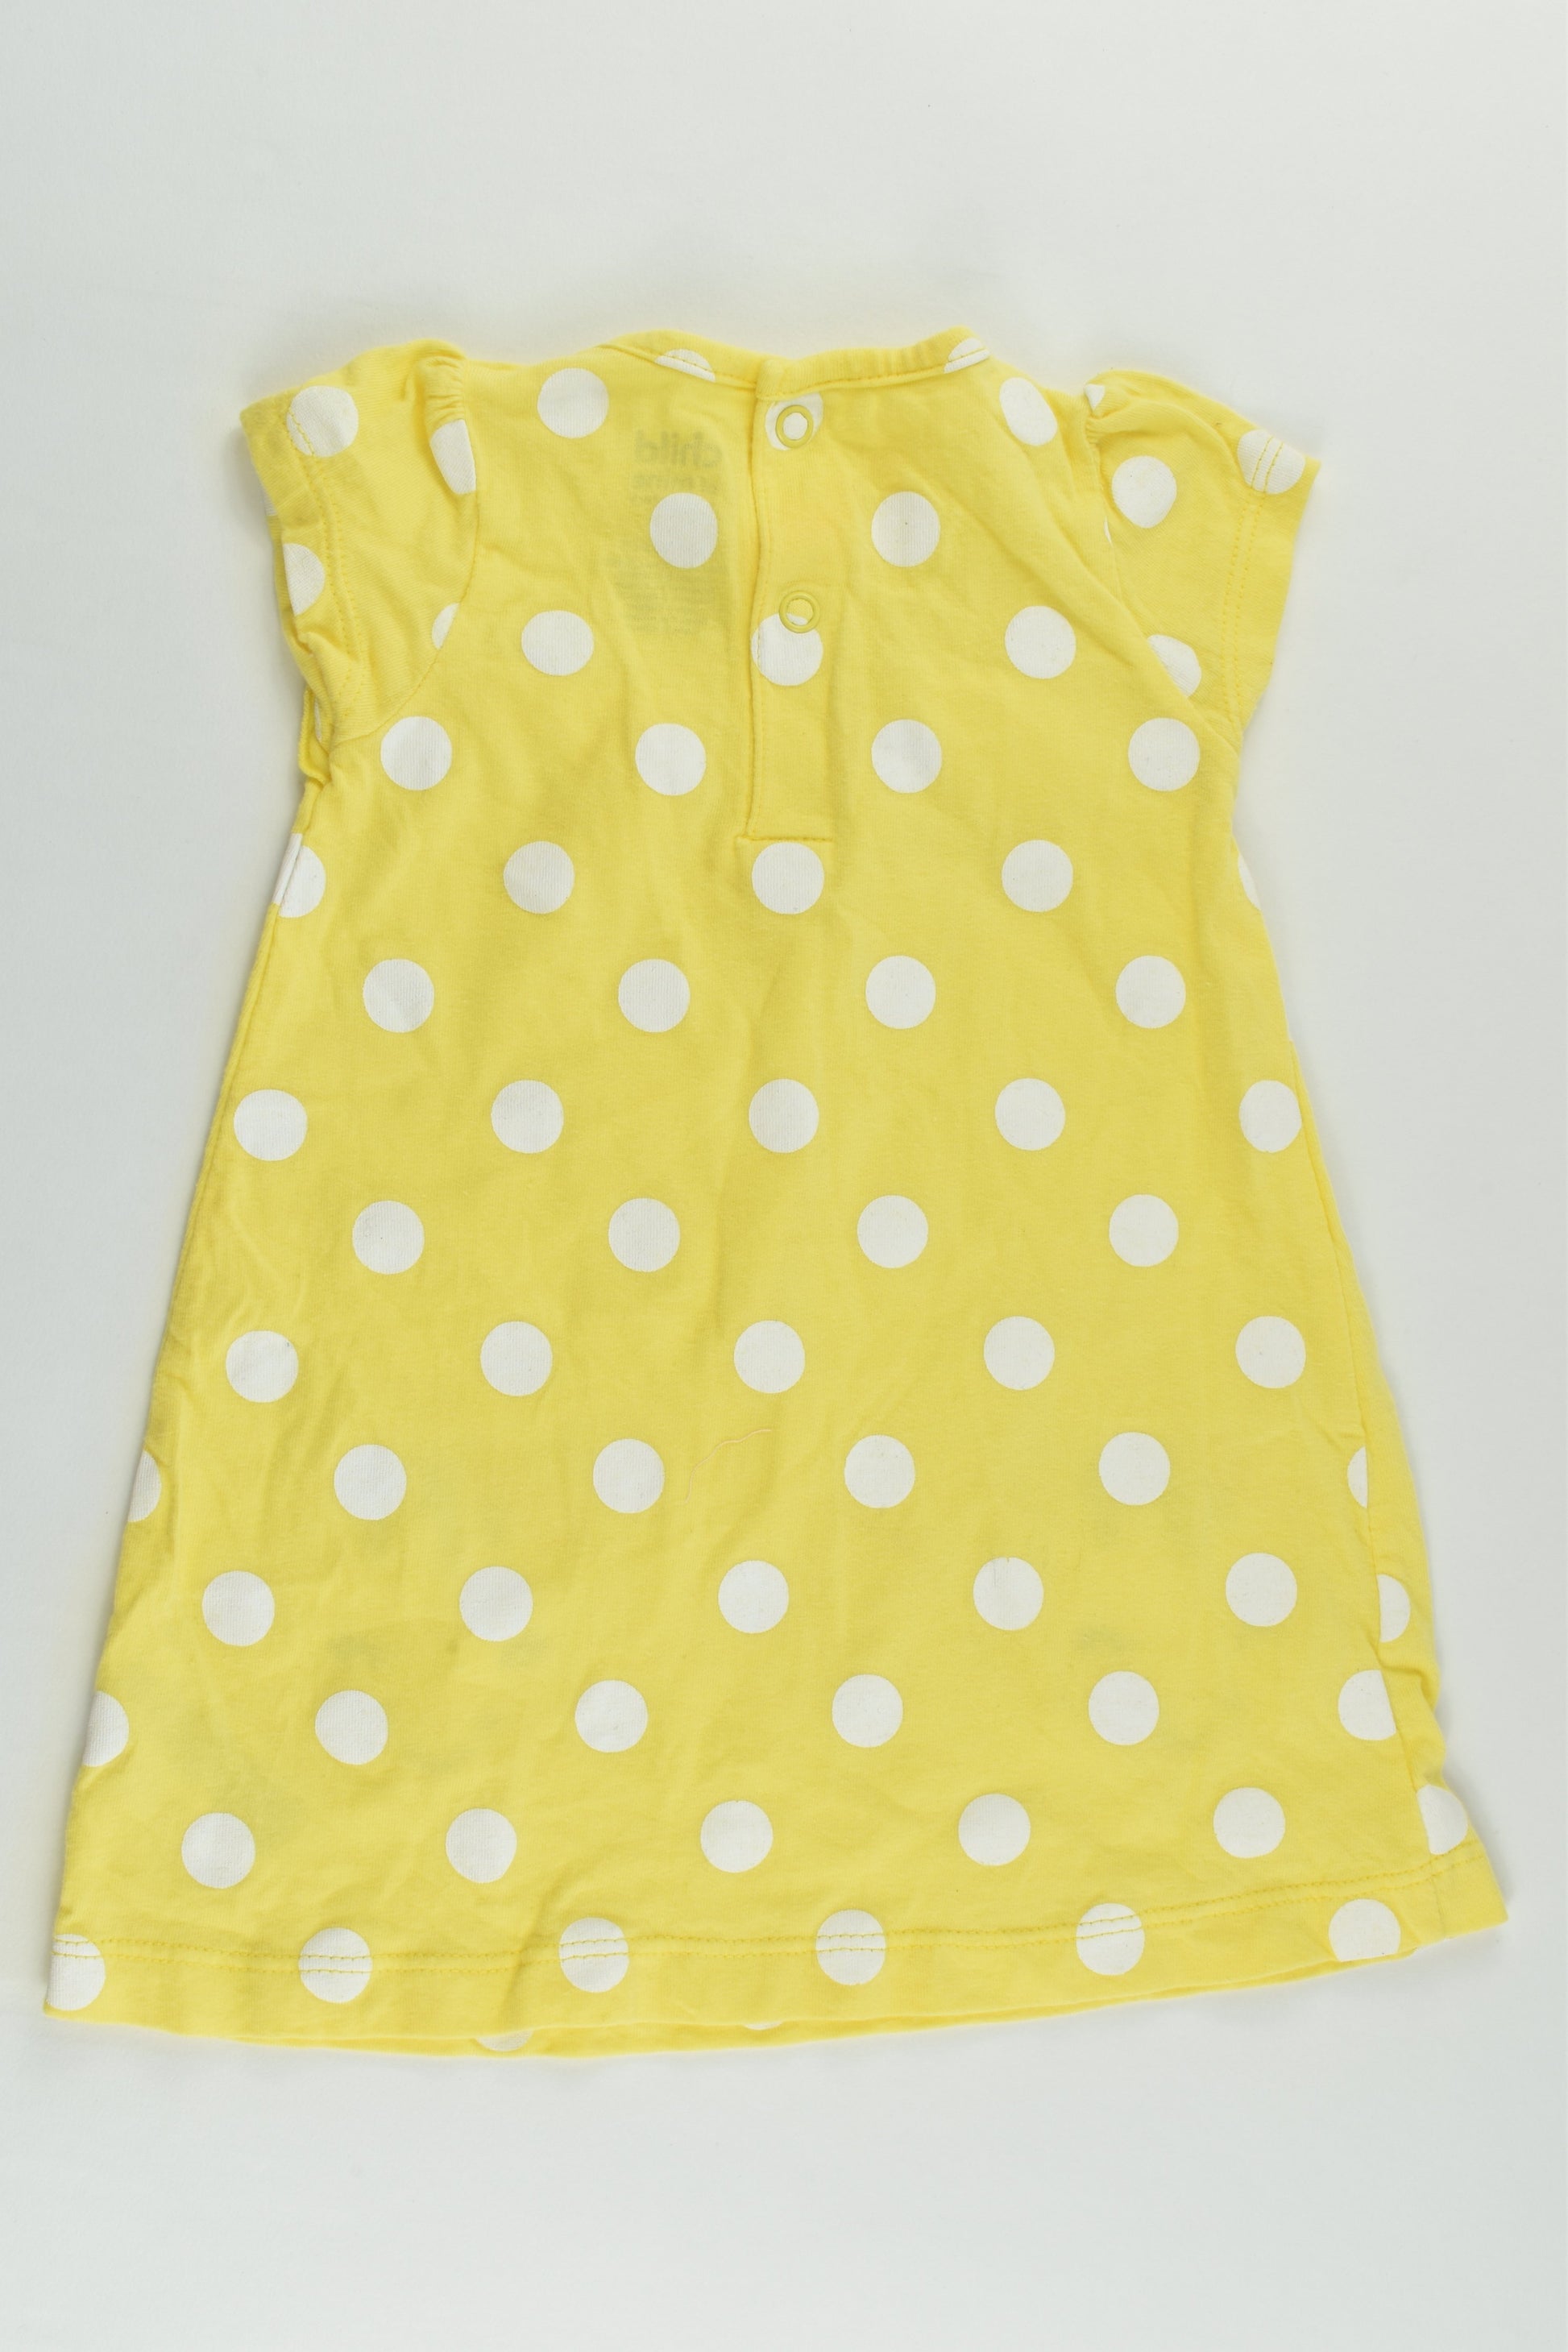 Child Of Mine by Carter's Size 0 (6-9 months) Polka Dots Dress/Tunic